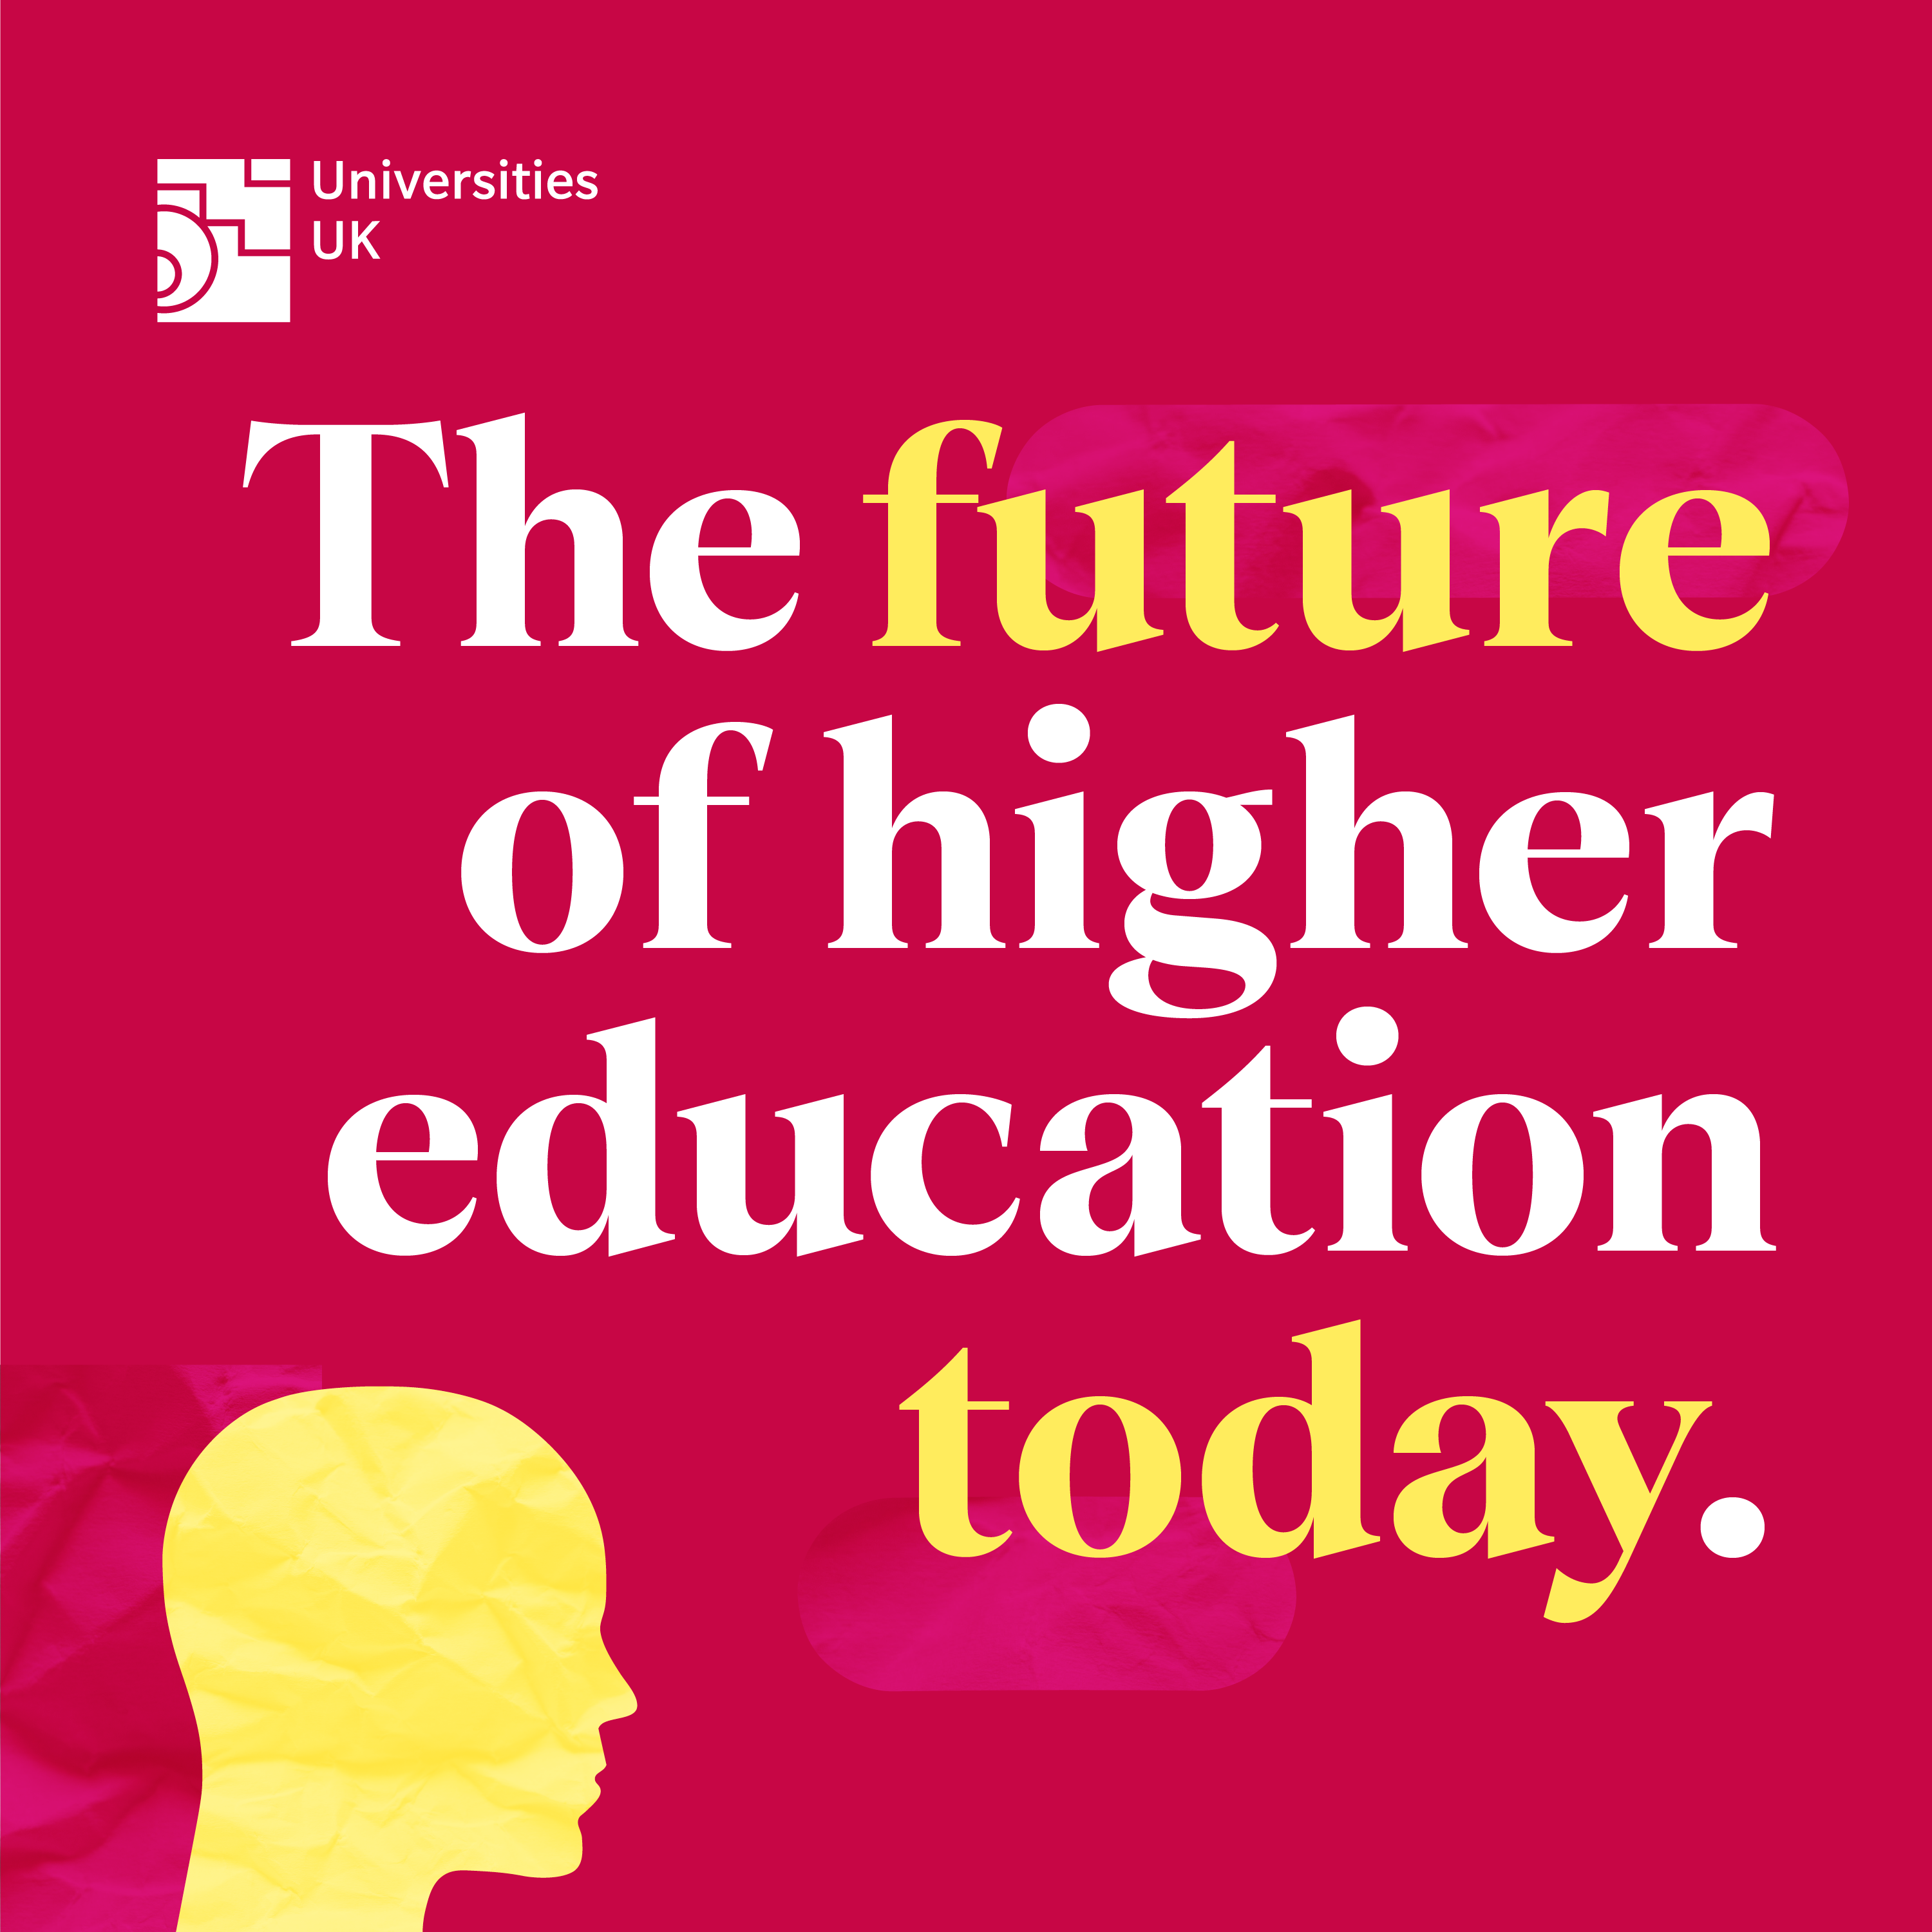 Artwork for The future of higher education today